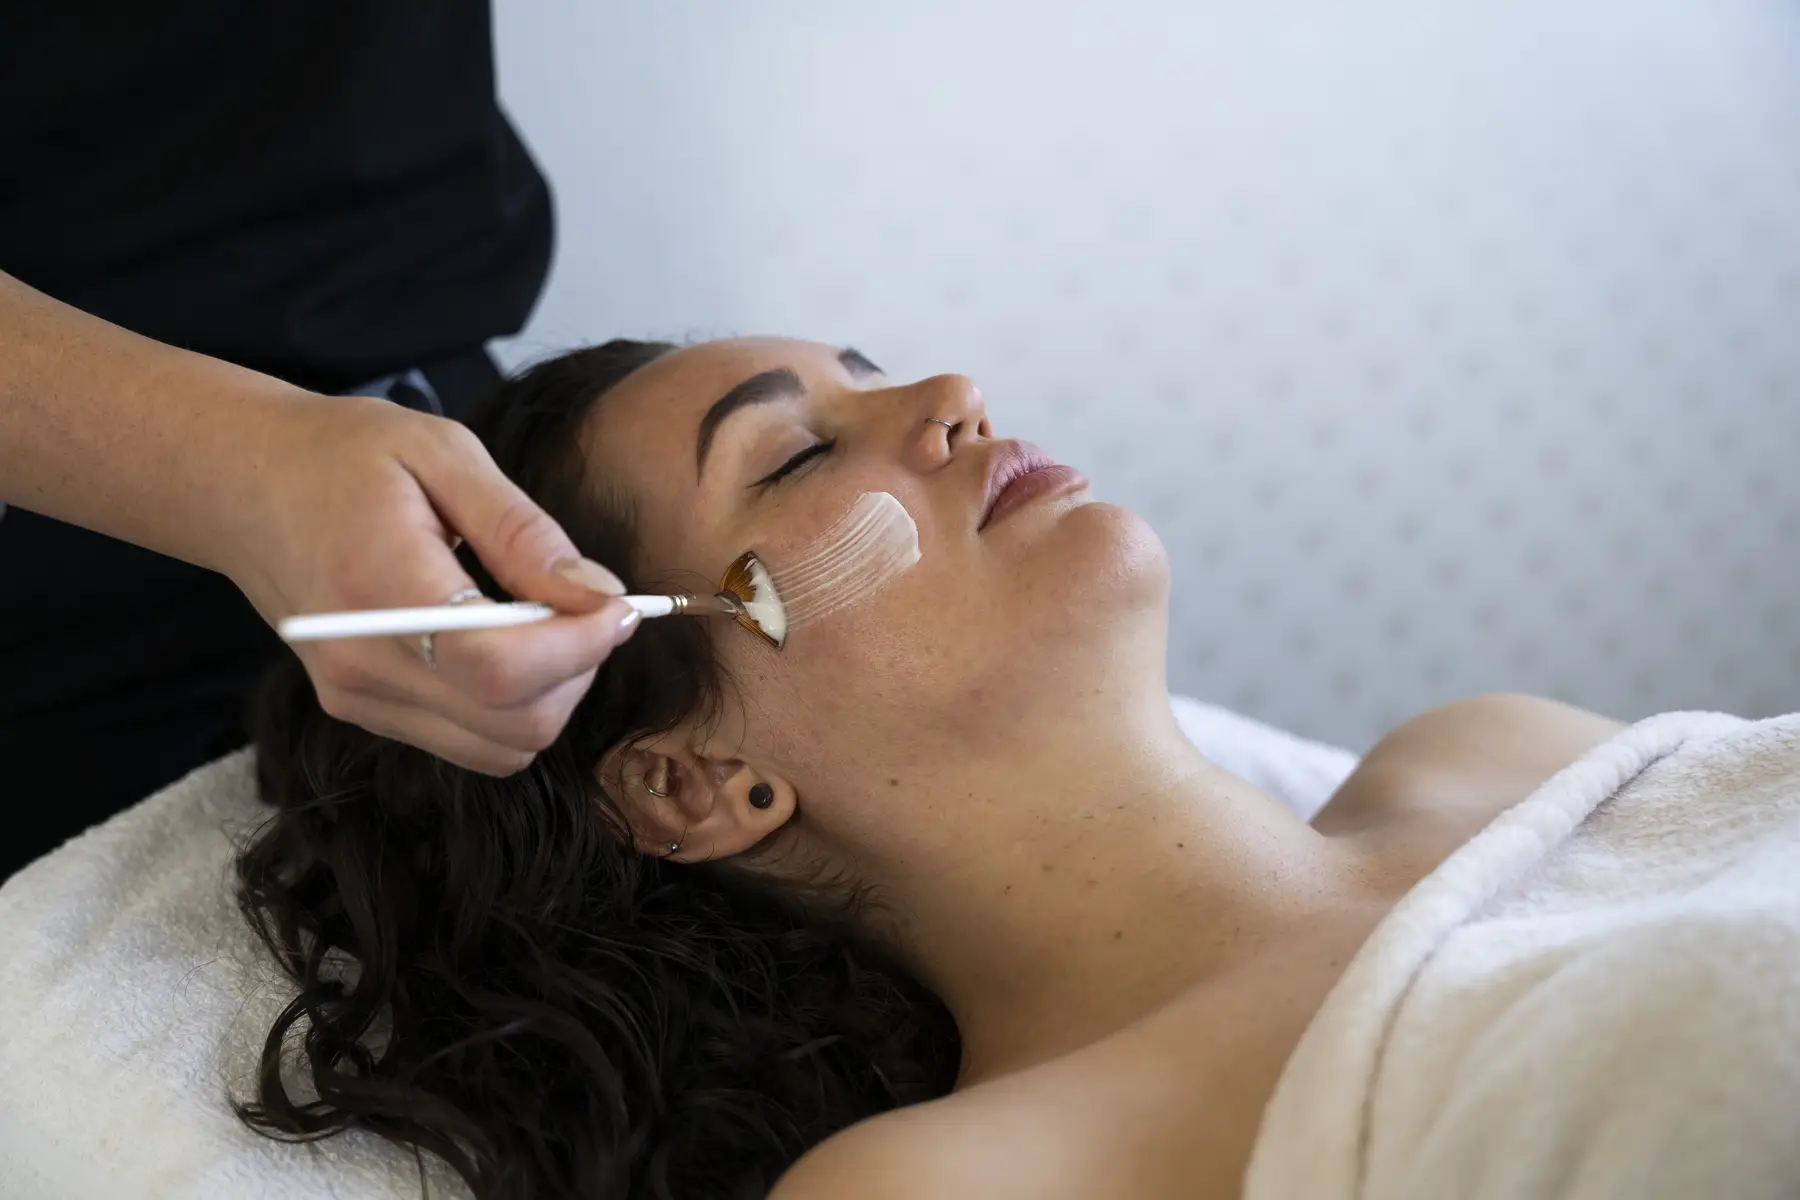 Personalized facial treatment being applied to woman